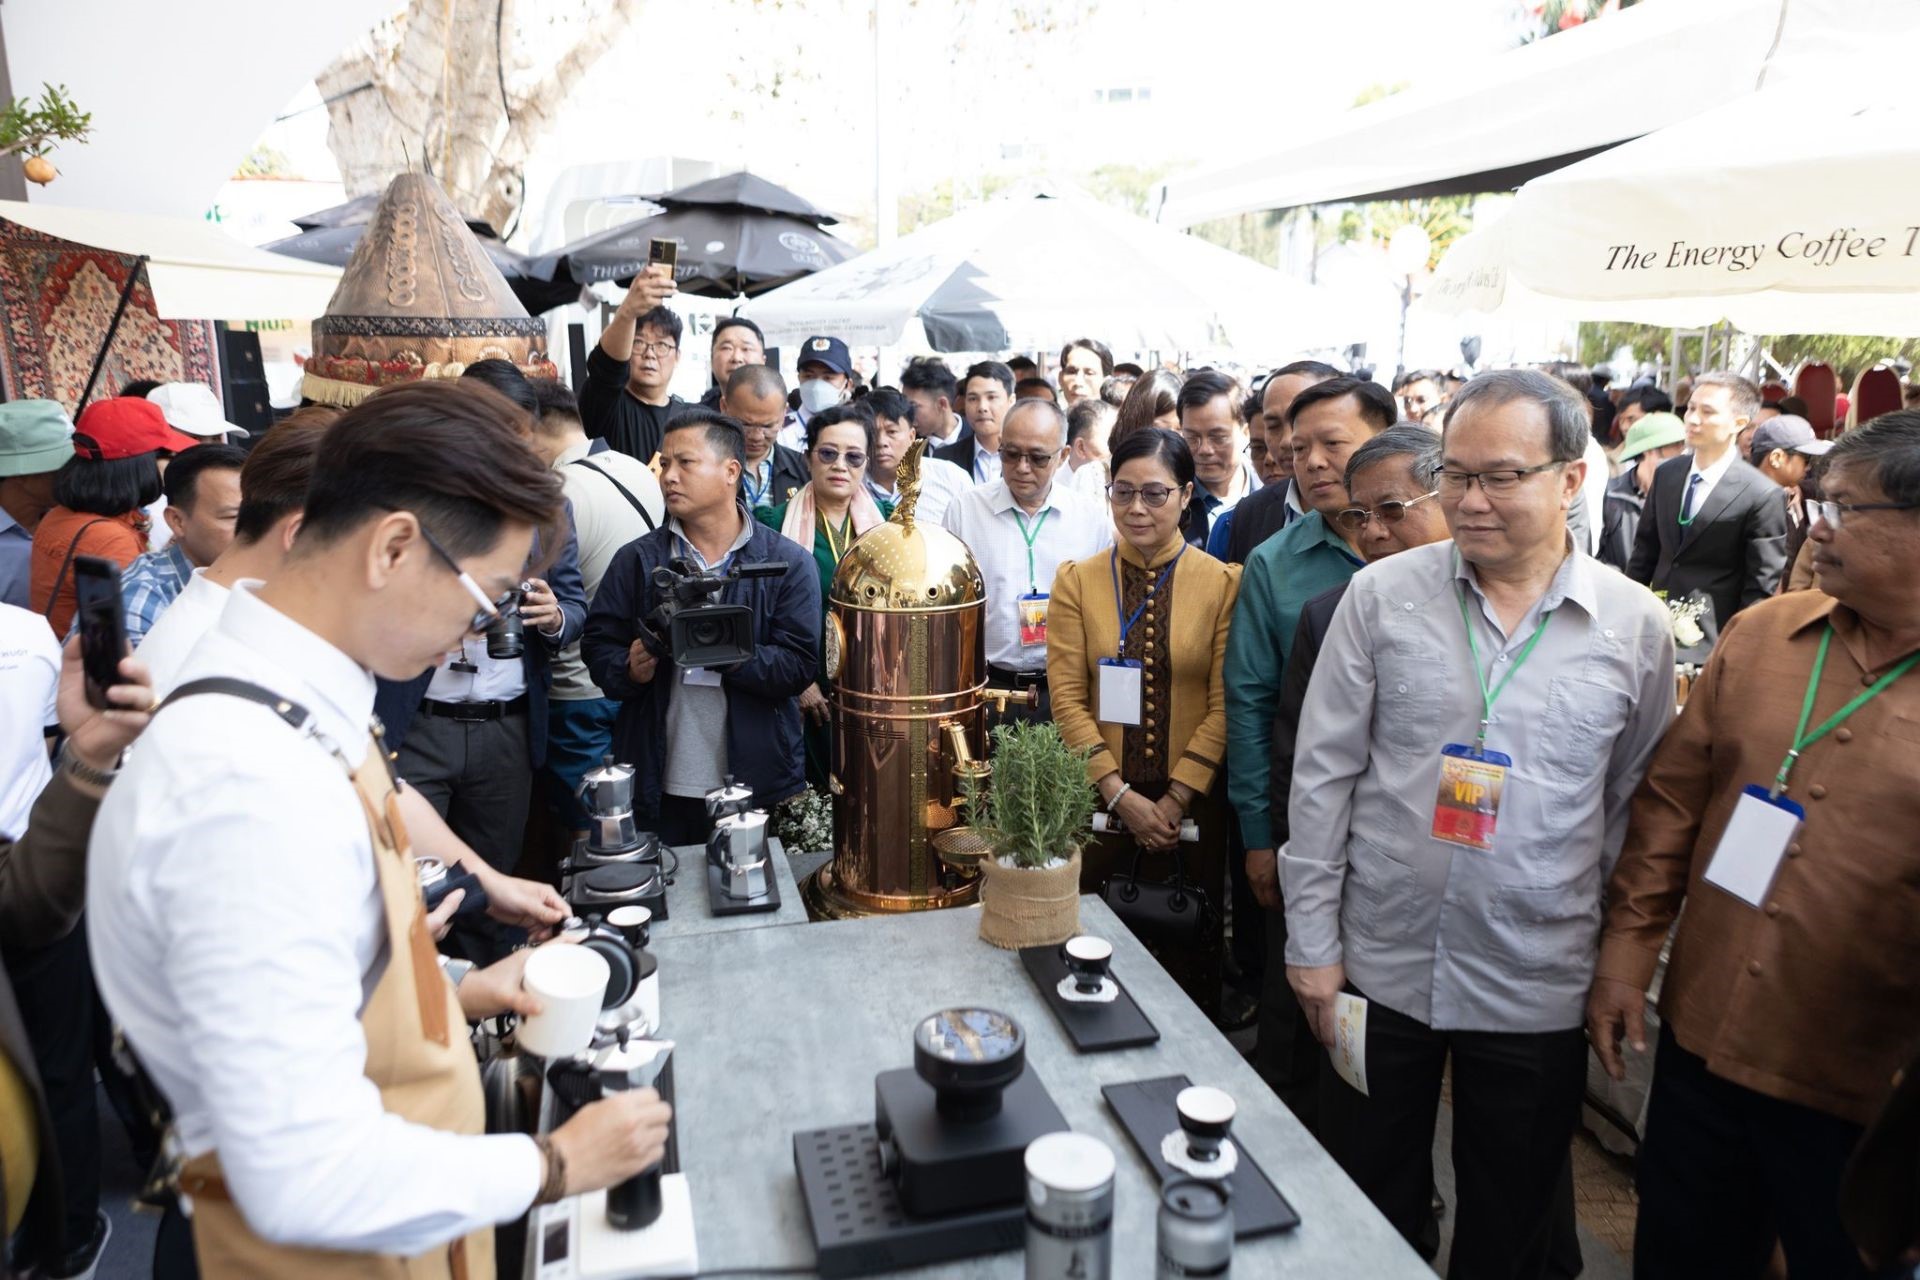 The special booth of Trung Nguyen Legend attracts a large number of visitors to experience the three typical coffee civilizations of the Ottoman-Roman-Zen world.